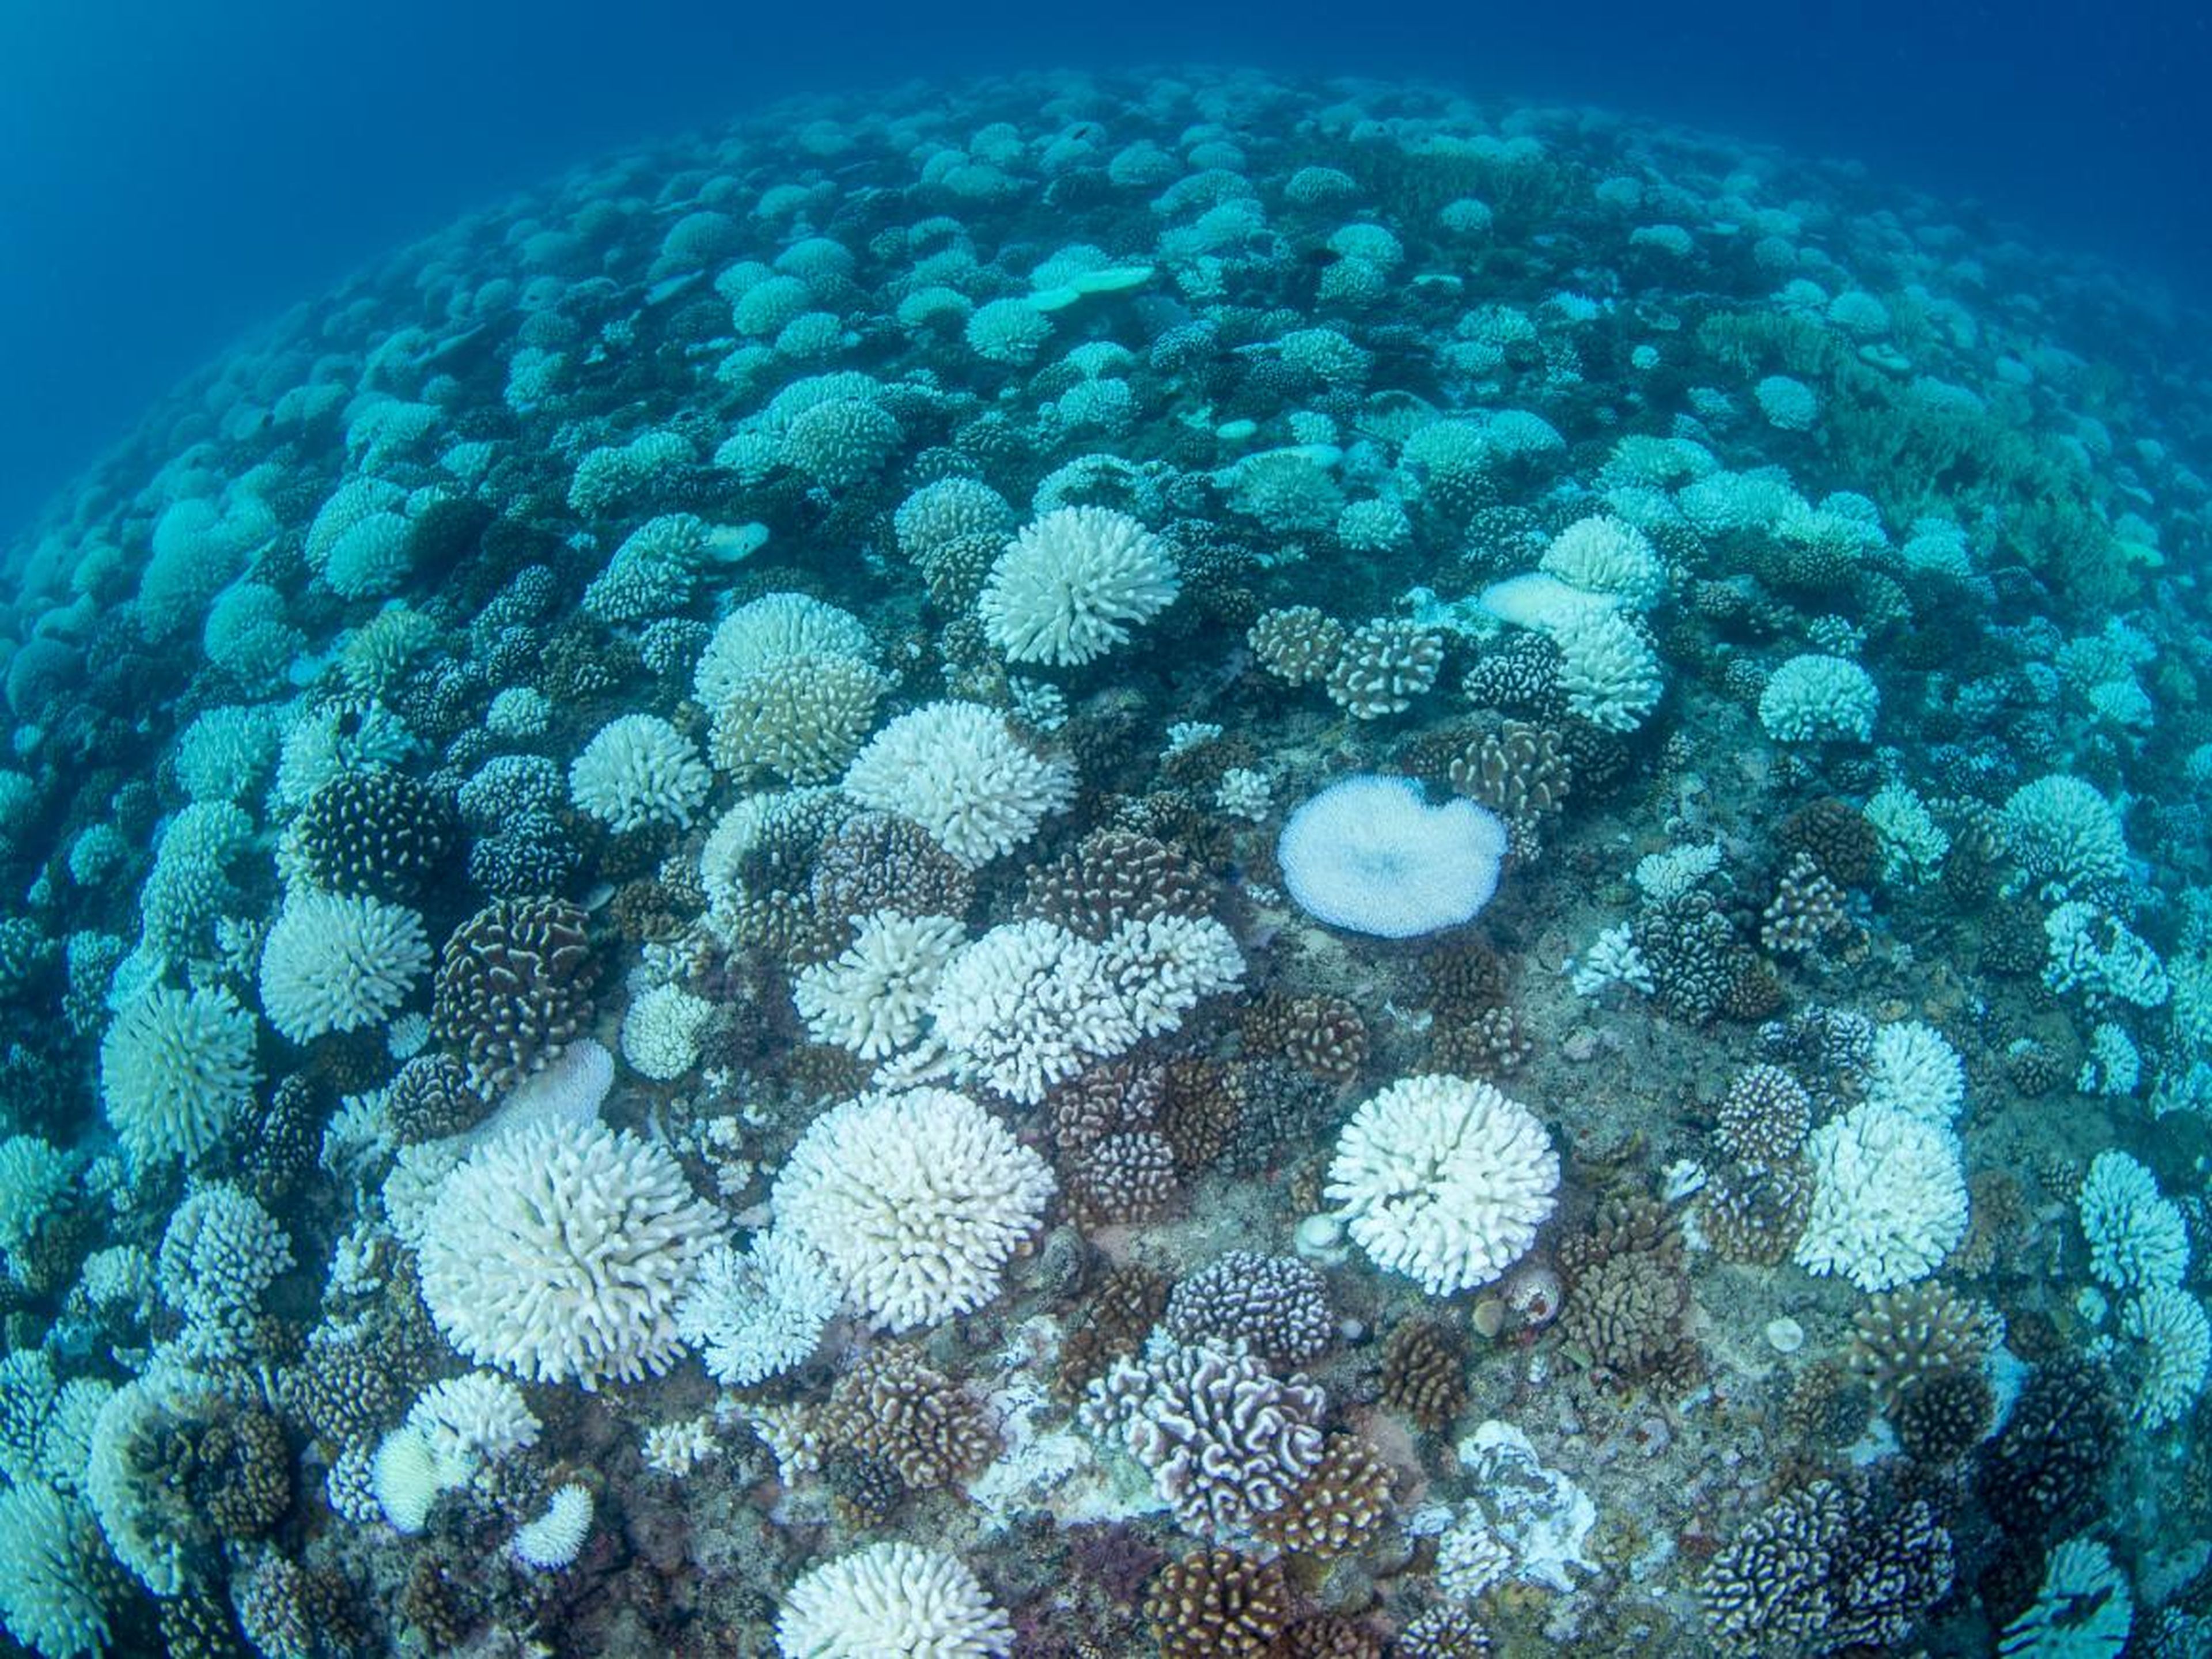 Other crucial ecosystems face collapse in the next decade as well. At present rates, it's expected that 60% of all coral reefs will be highly or critically threatened by 2030.